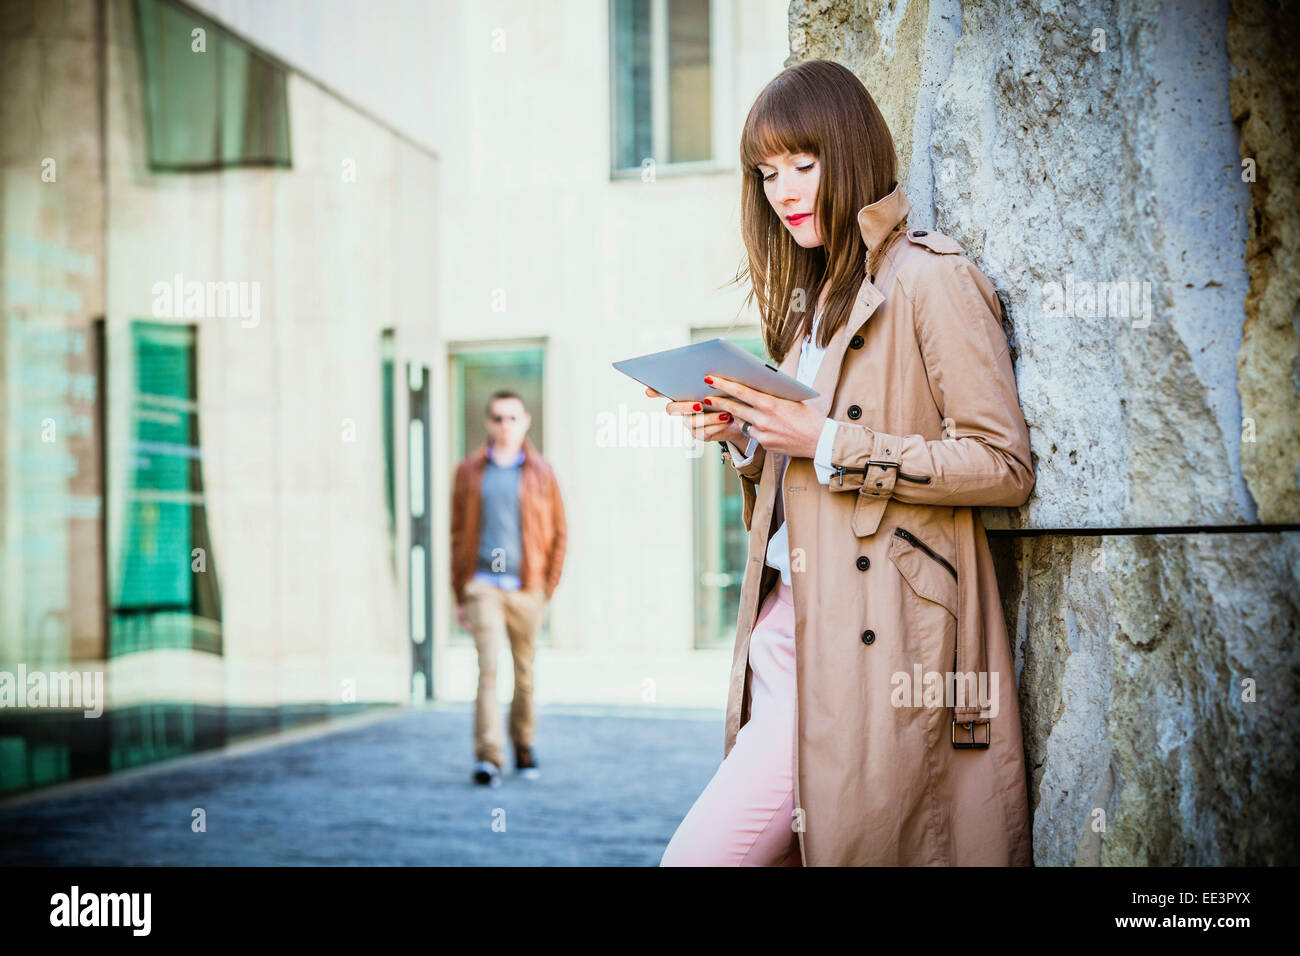 Young woman using digital tablet outdoors, Munich, Bavaria, Germany Stock Photo